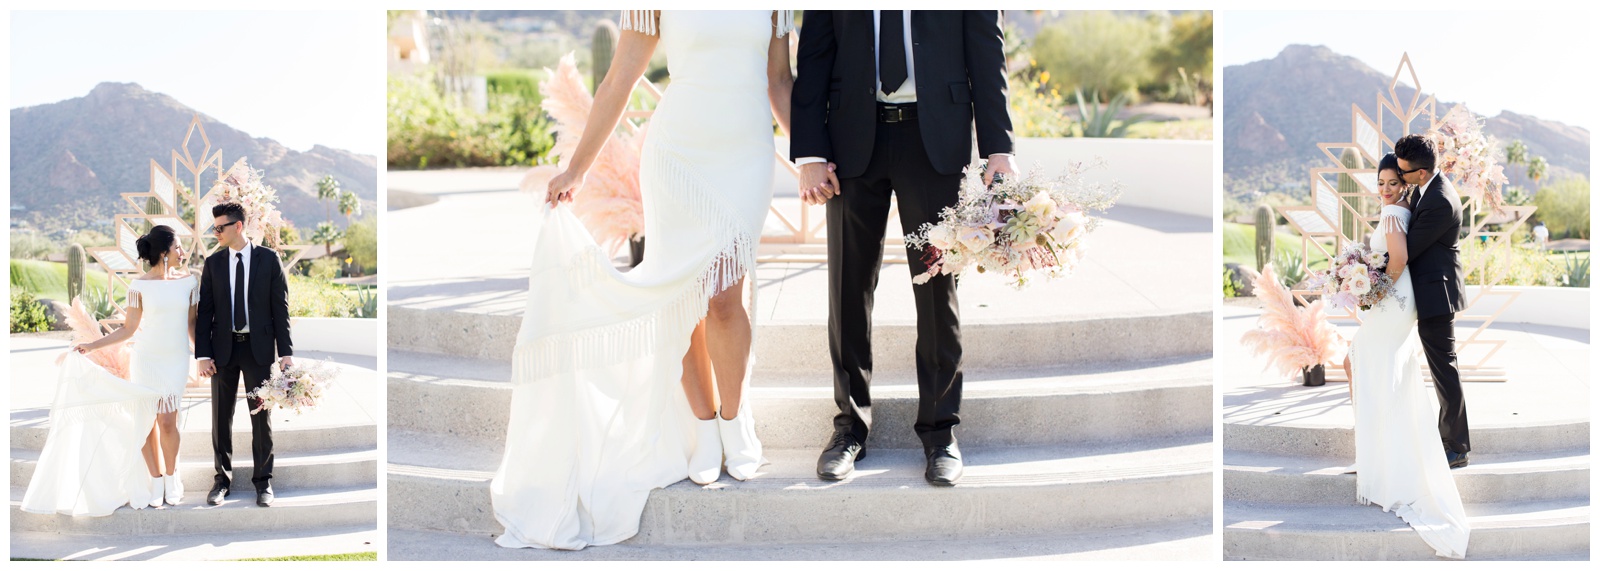 cool and trendy wedding photos at Mountain Shadows Resort